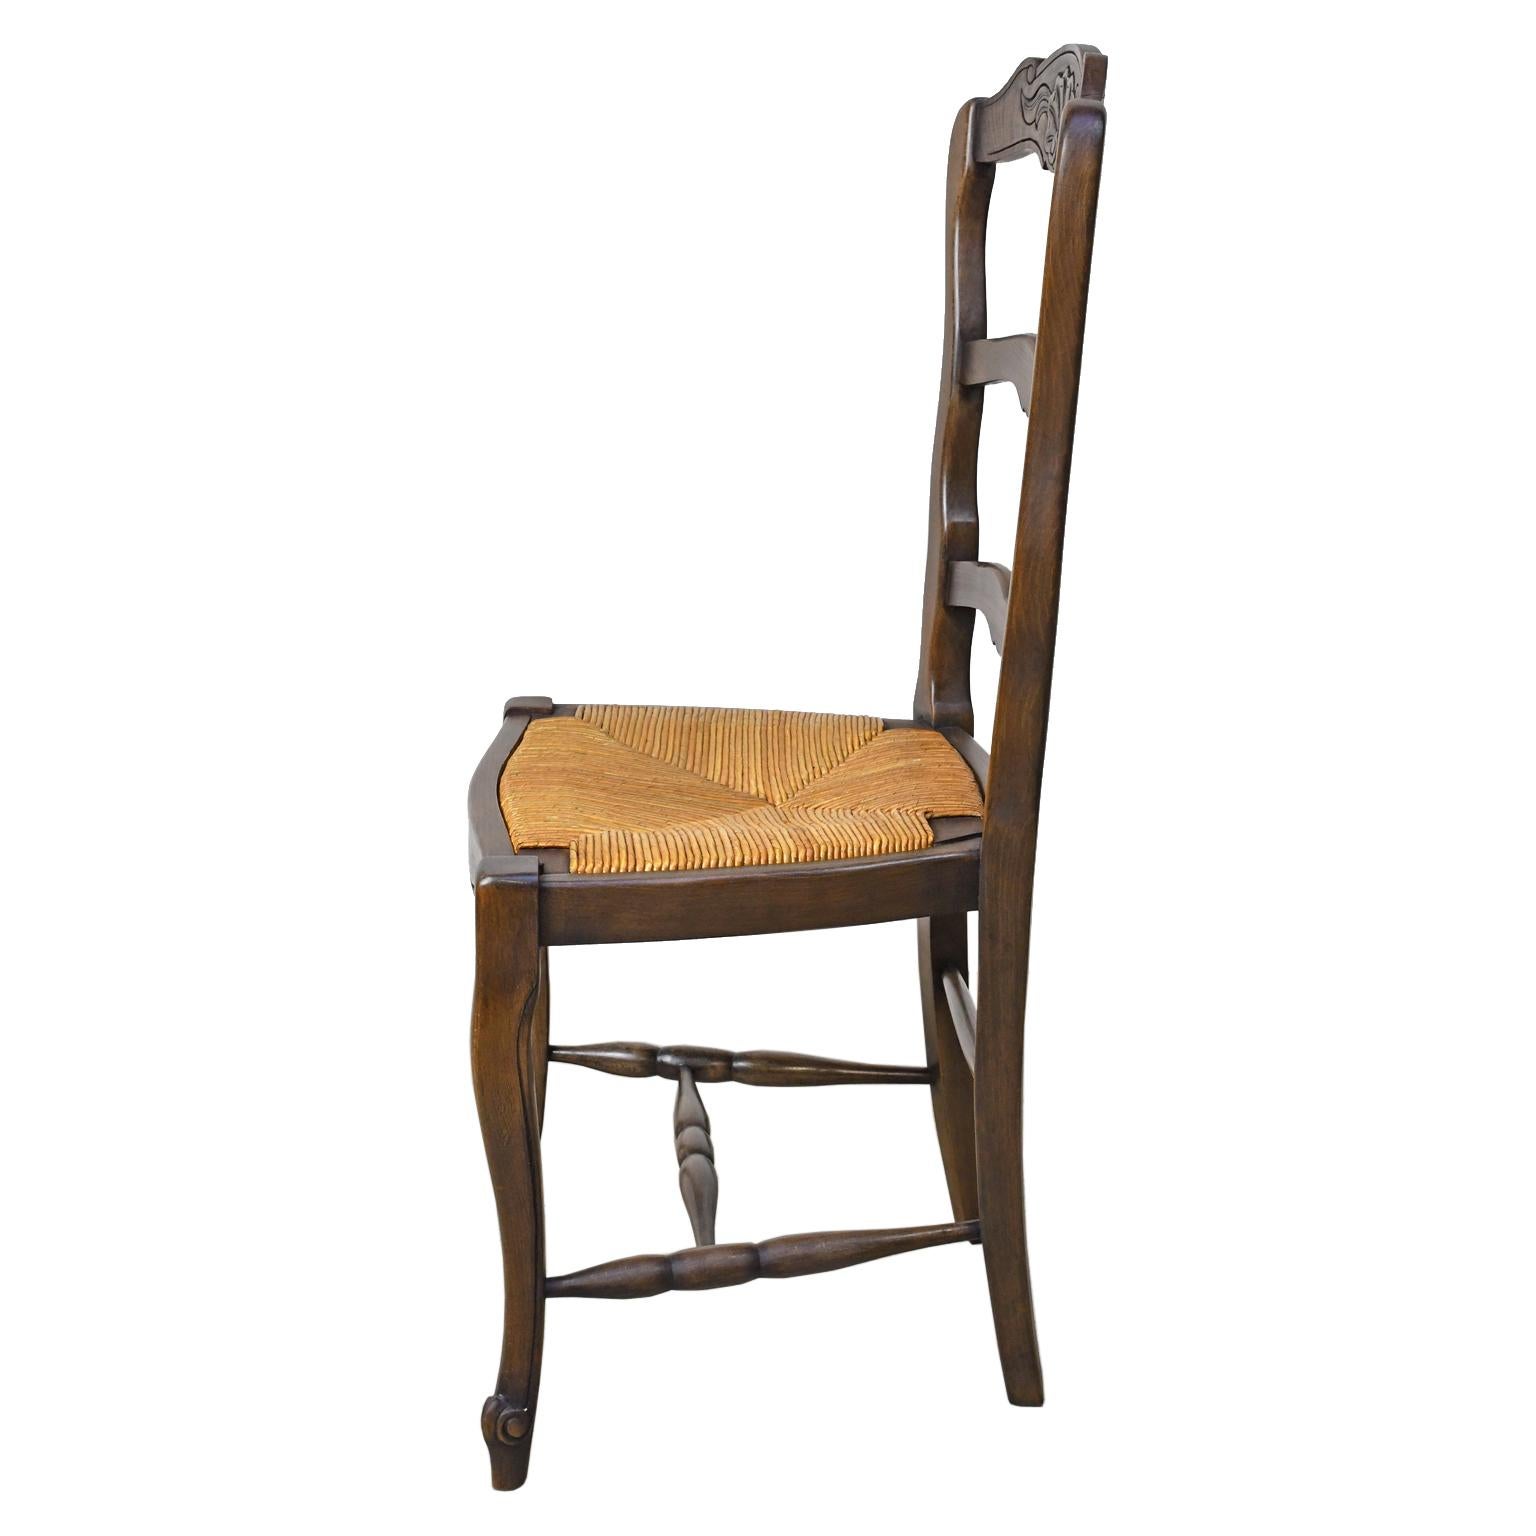 Carved Set of 6 Provincial French Ladder Back Chairs, in Walnut Finish, circa 1900-1920